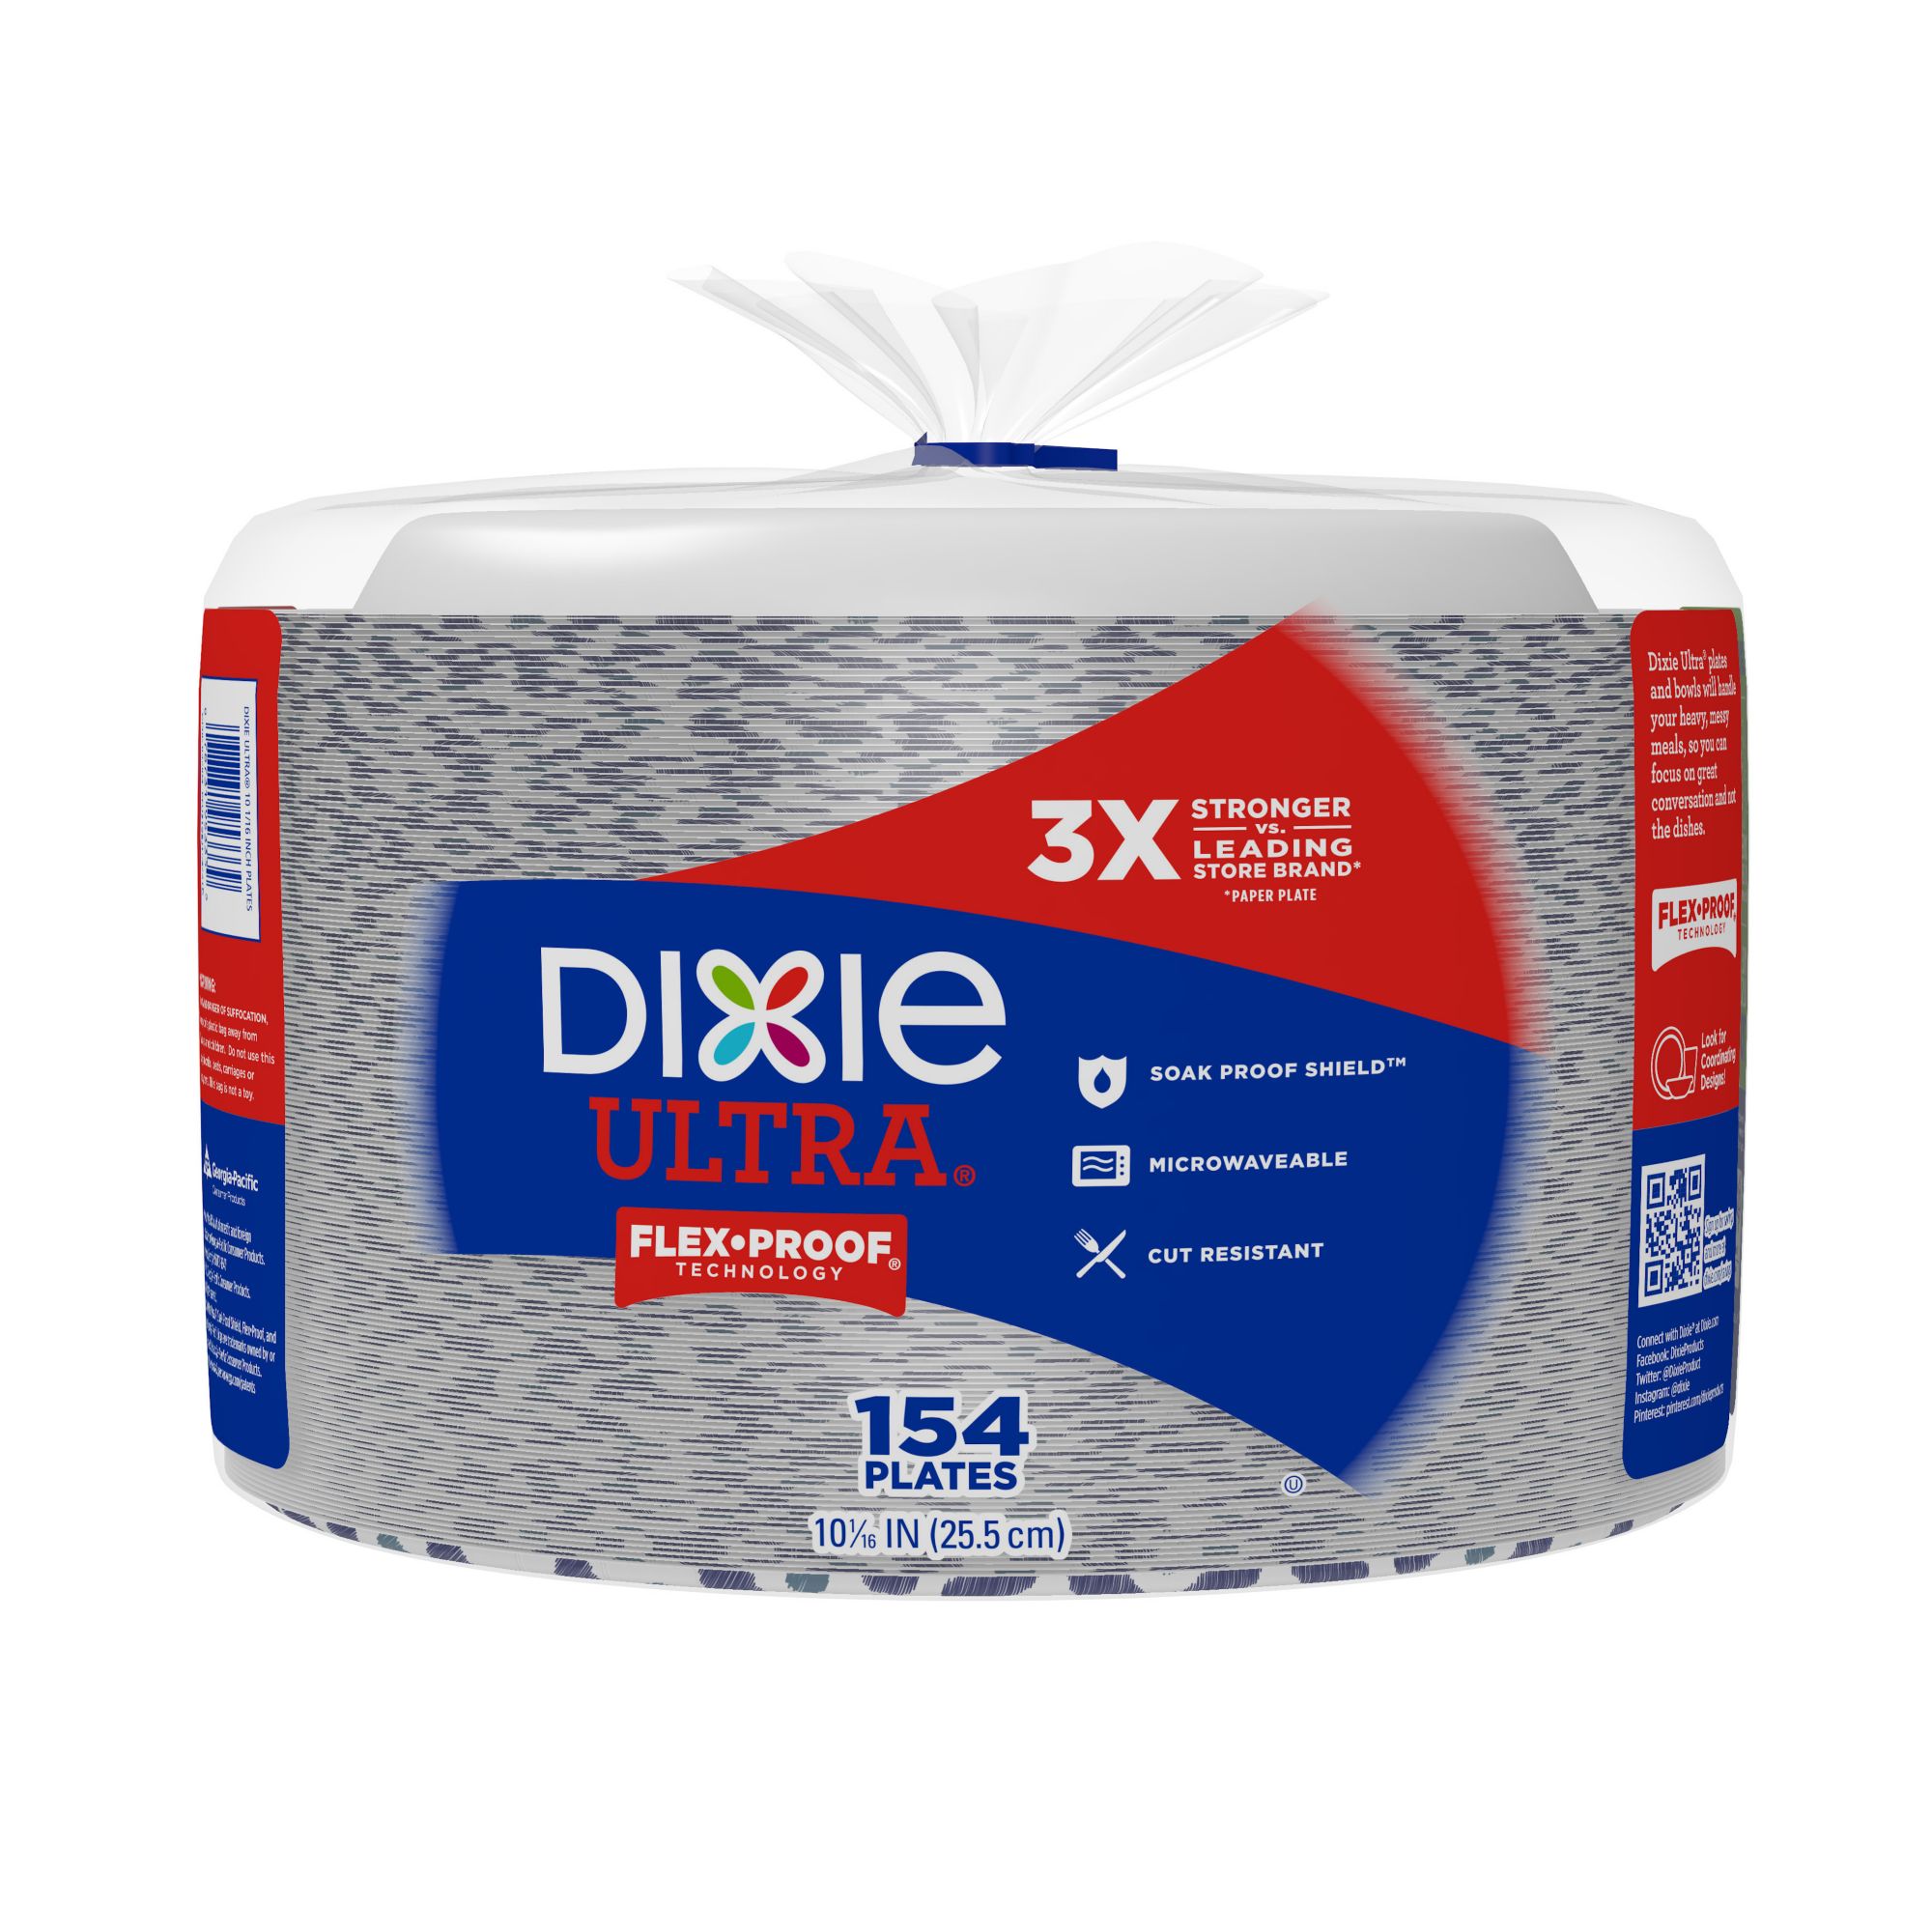 Dixie Ultra 9-9/16 Extra Deep Dish Paper Plate, 80 ct.